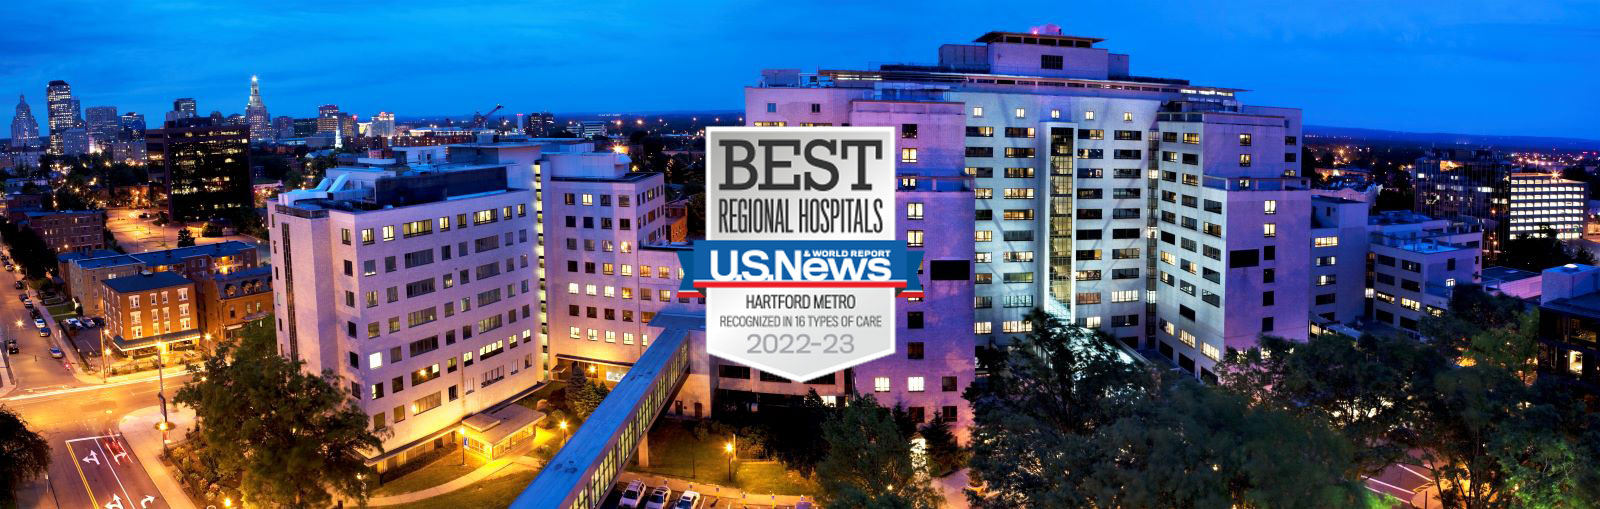 U.S. News & World Report Rates Hartford Hospital Best in Hartford Metro Area and among the best in Connecticut.